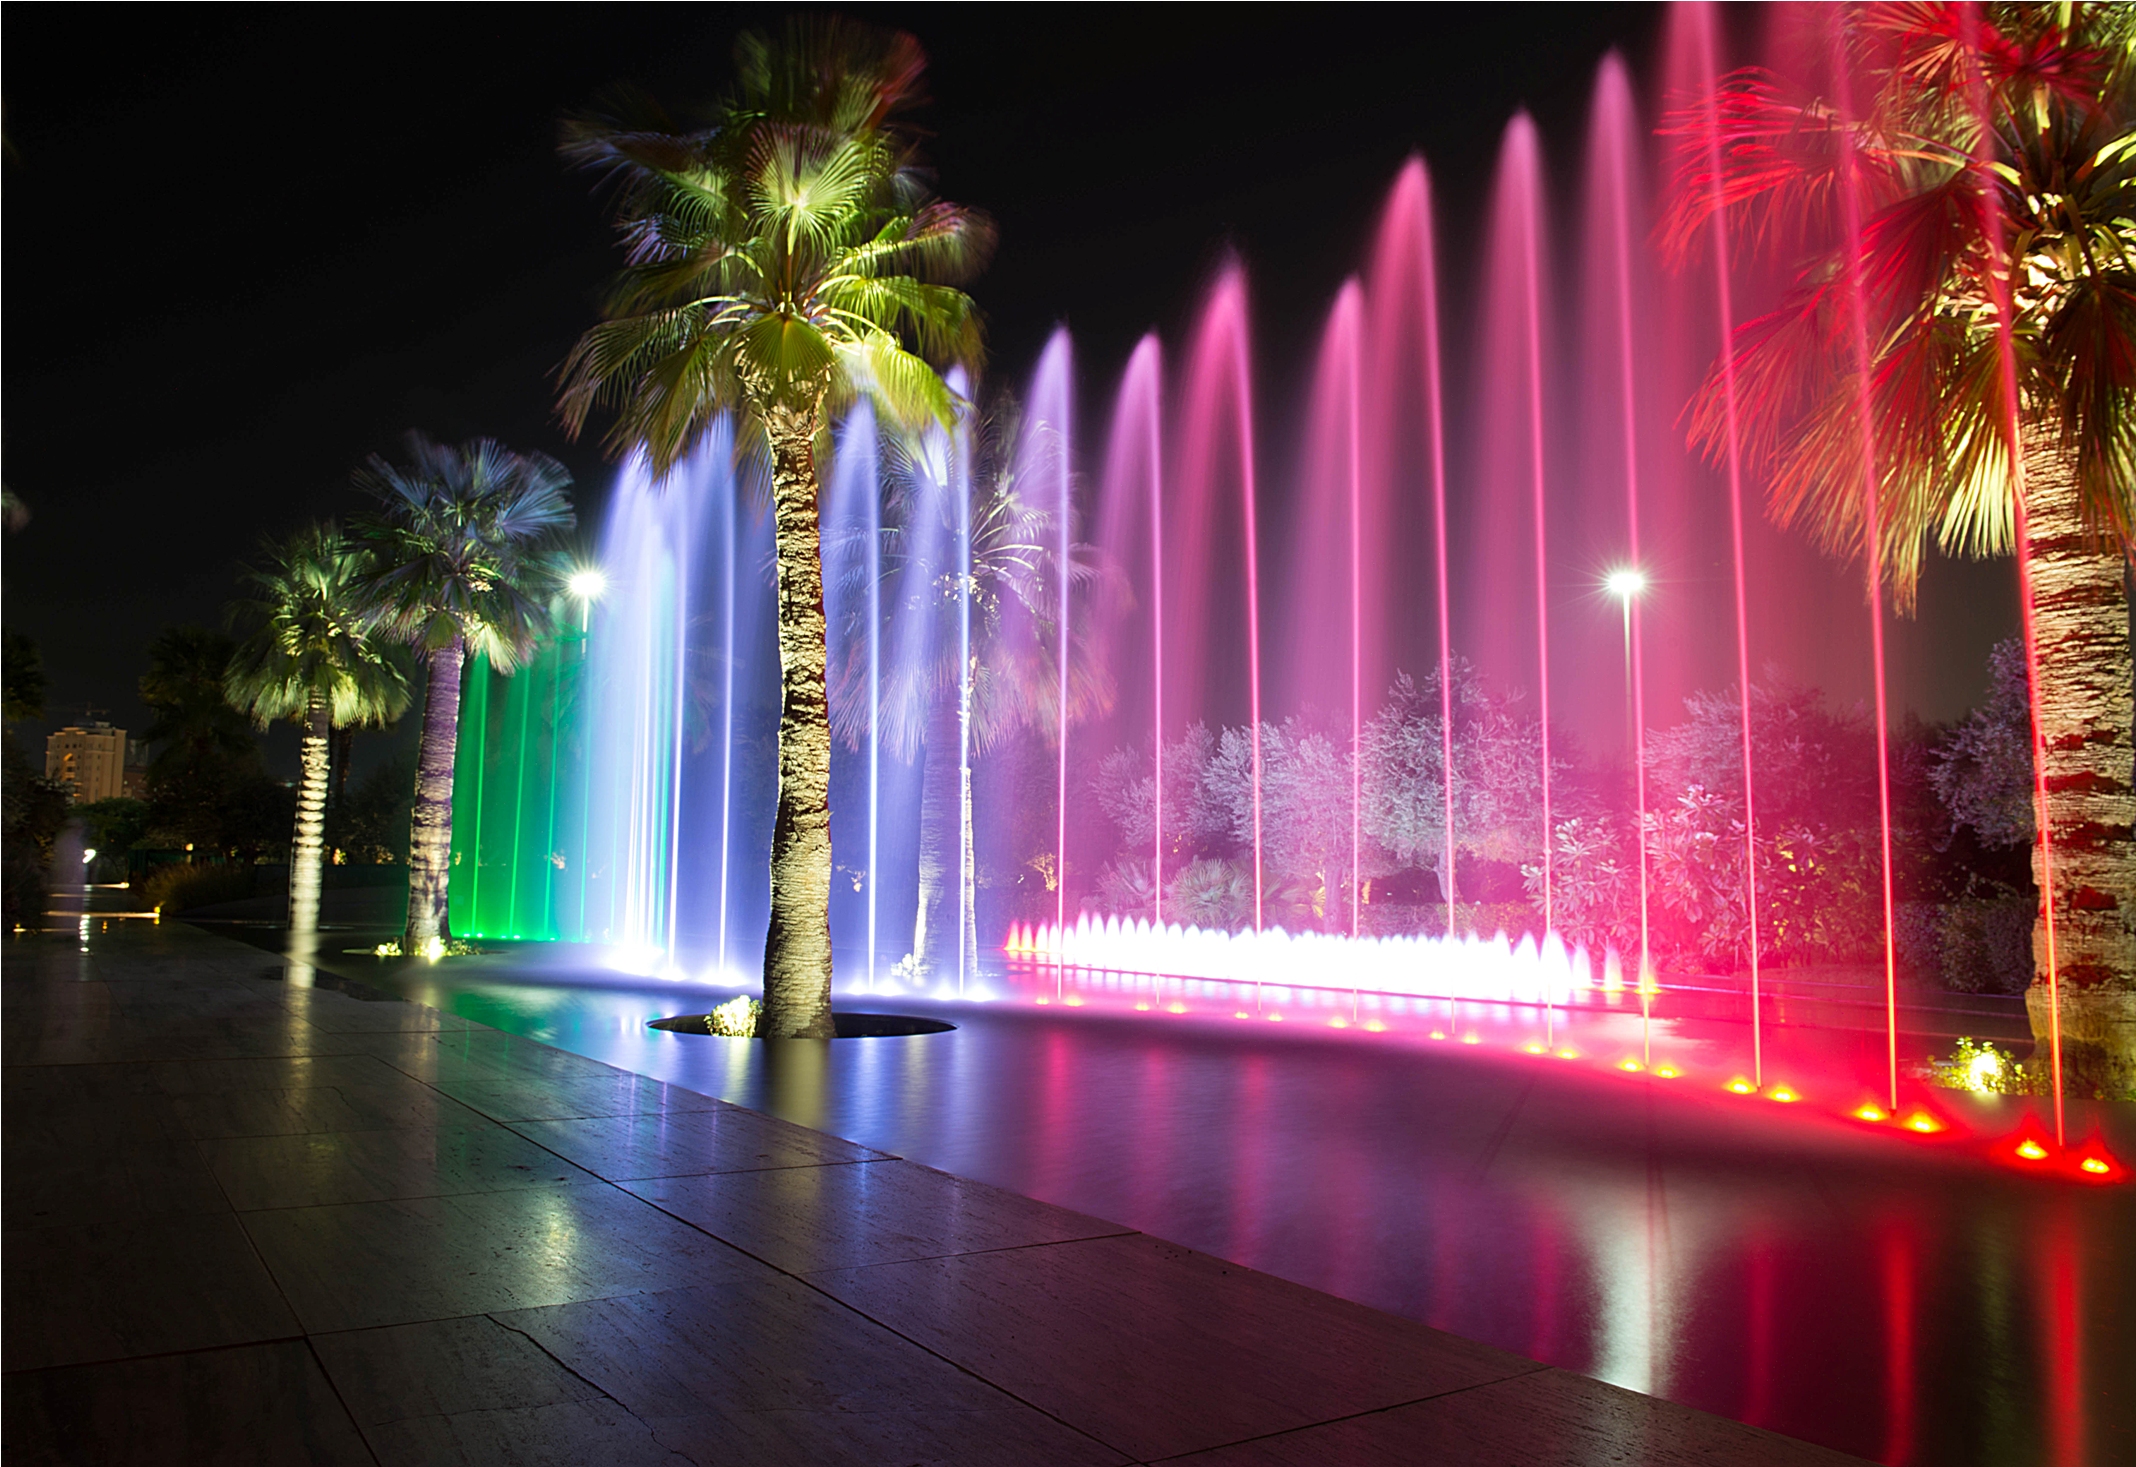 Spectacular lightshows, fascinating greenery, water fountains, and outstanding monuments, hot evenings at Al-Shaheed Park